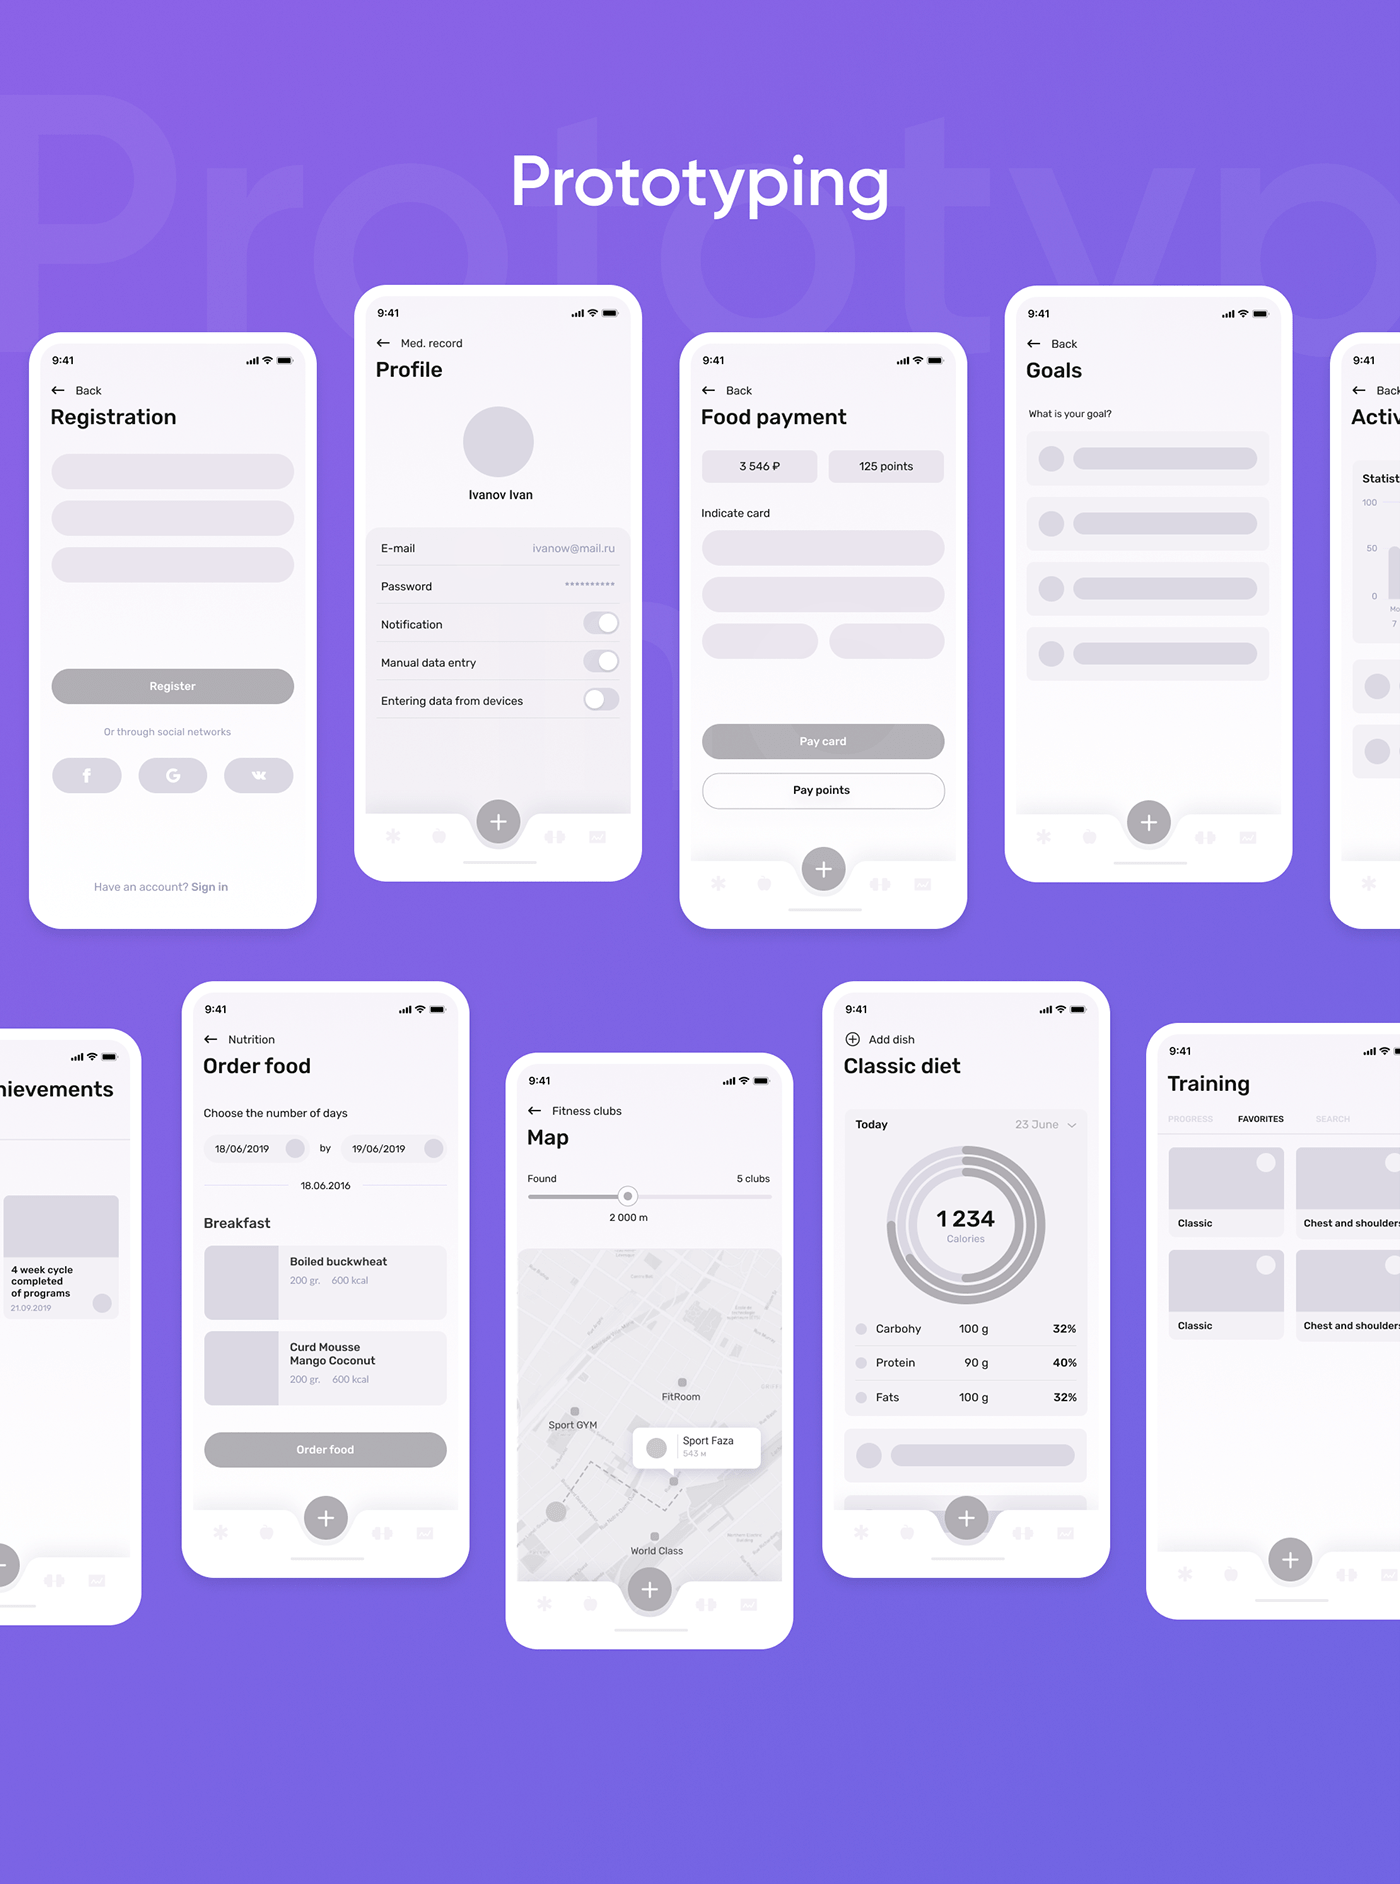 Prototyping screens of the app